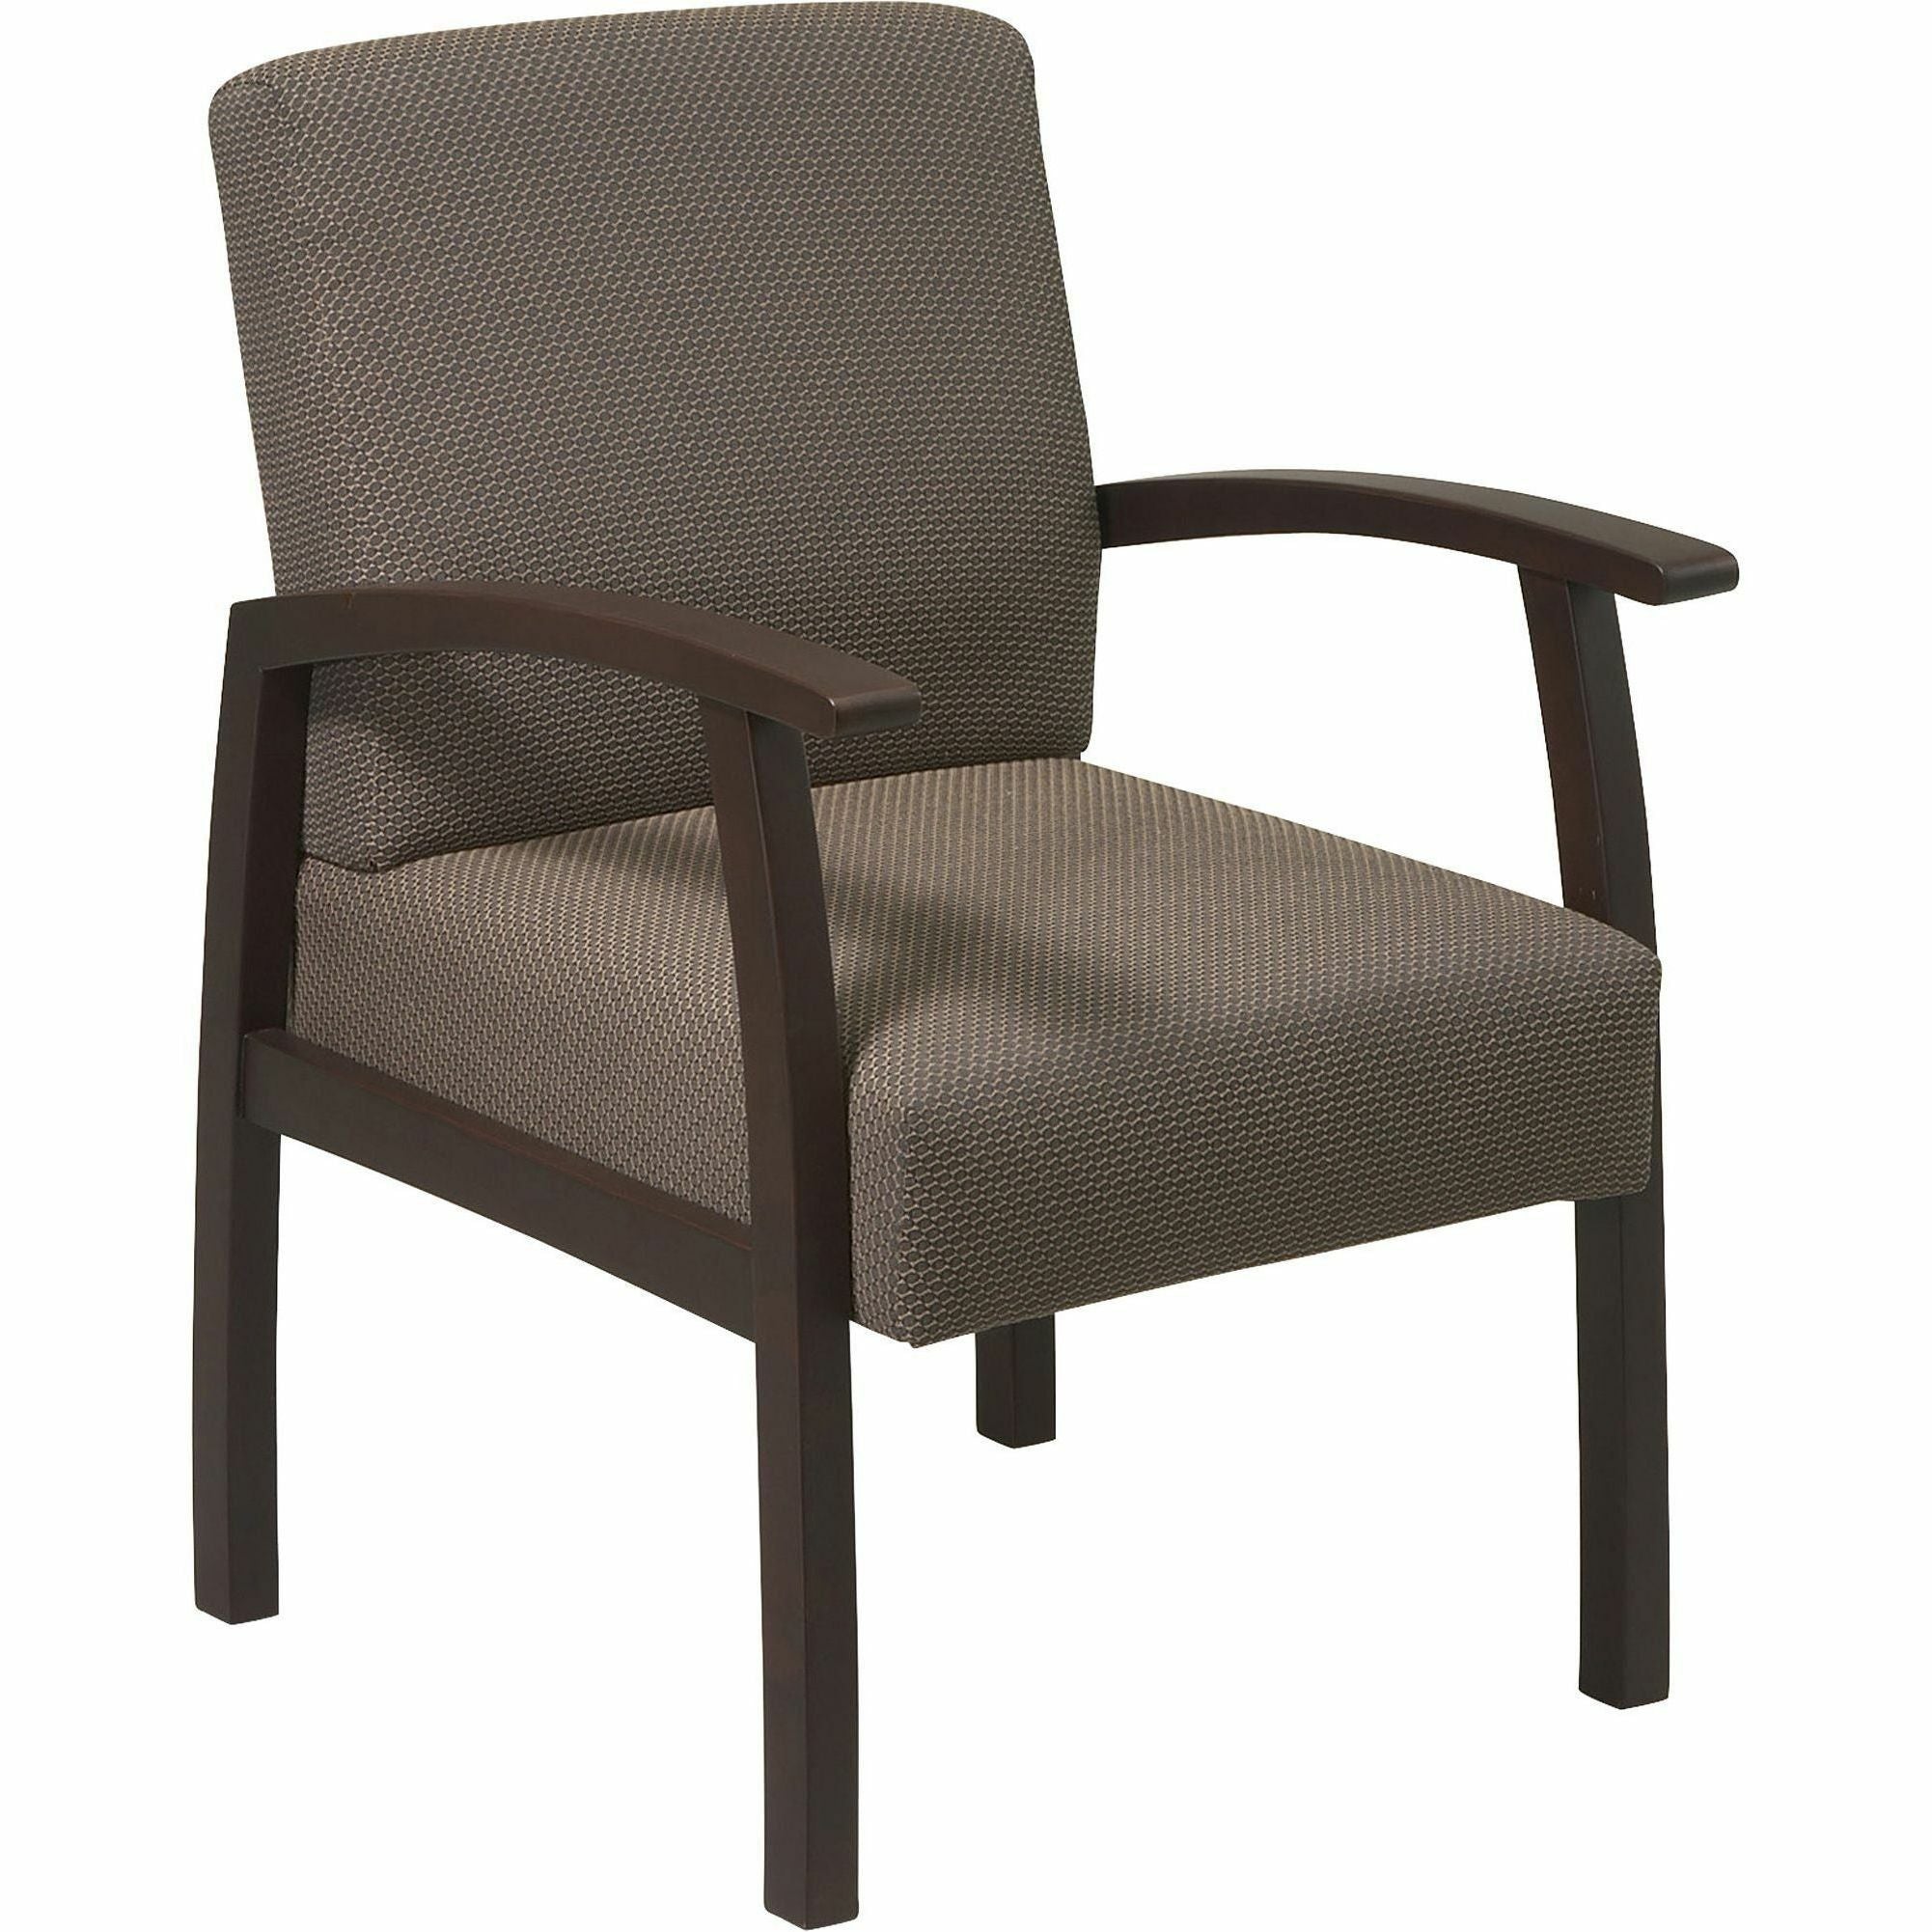 Lorell Thickly Padded Guest Chair - Espresso Frame - Four-legged Base - Taupe - 1 Each - 